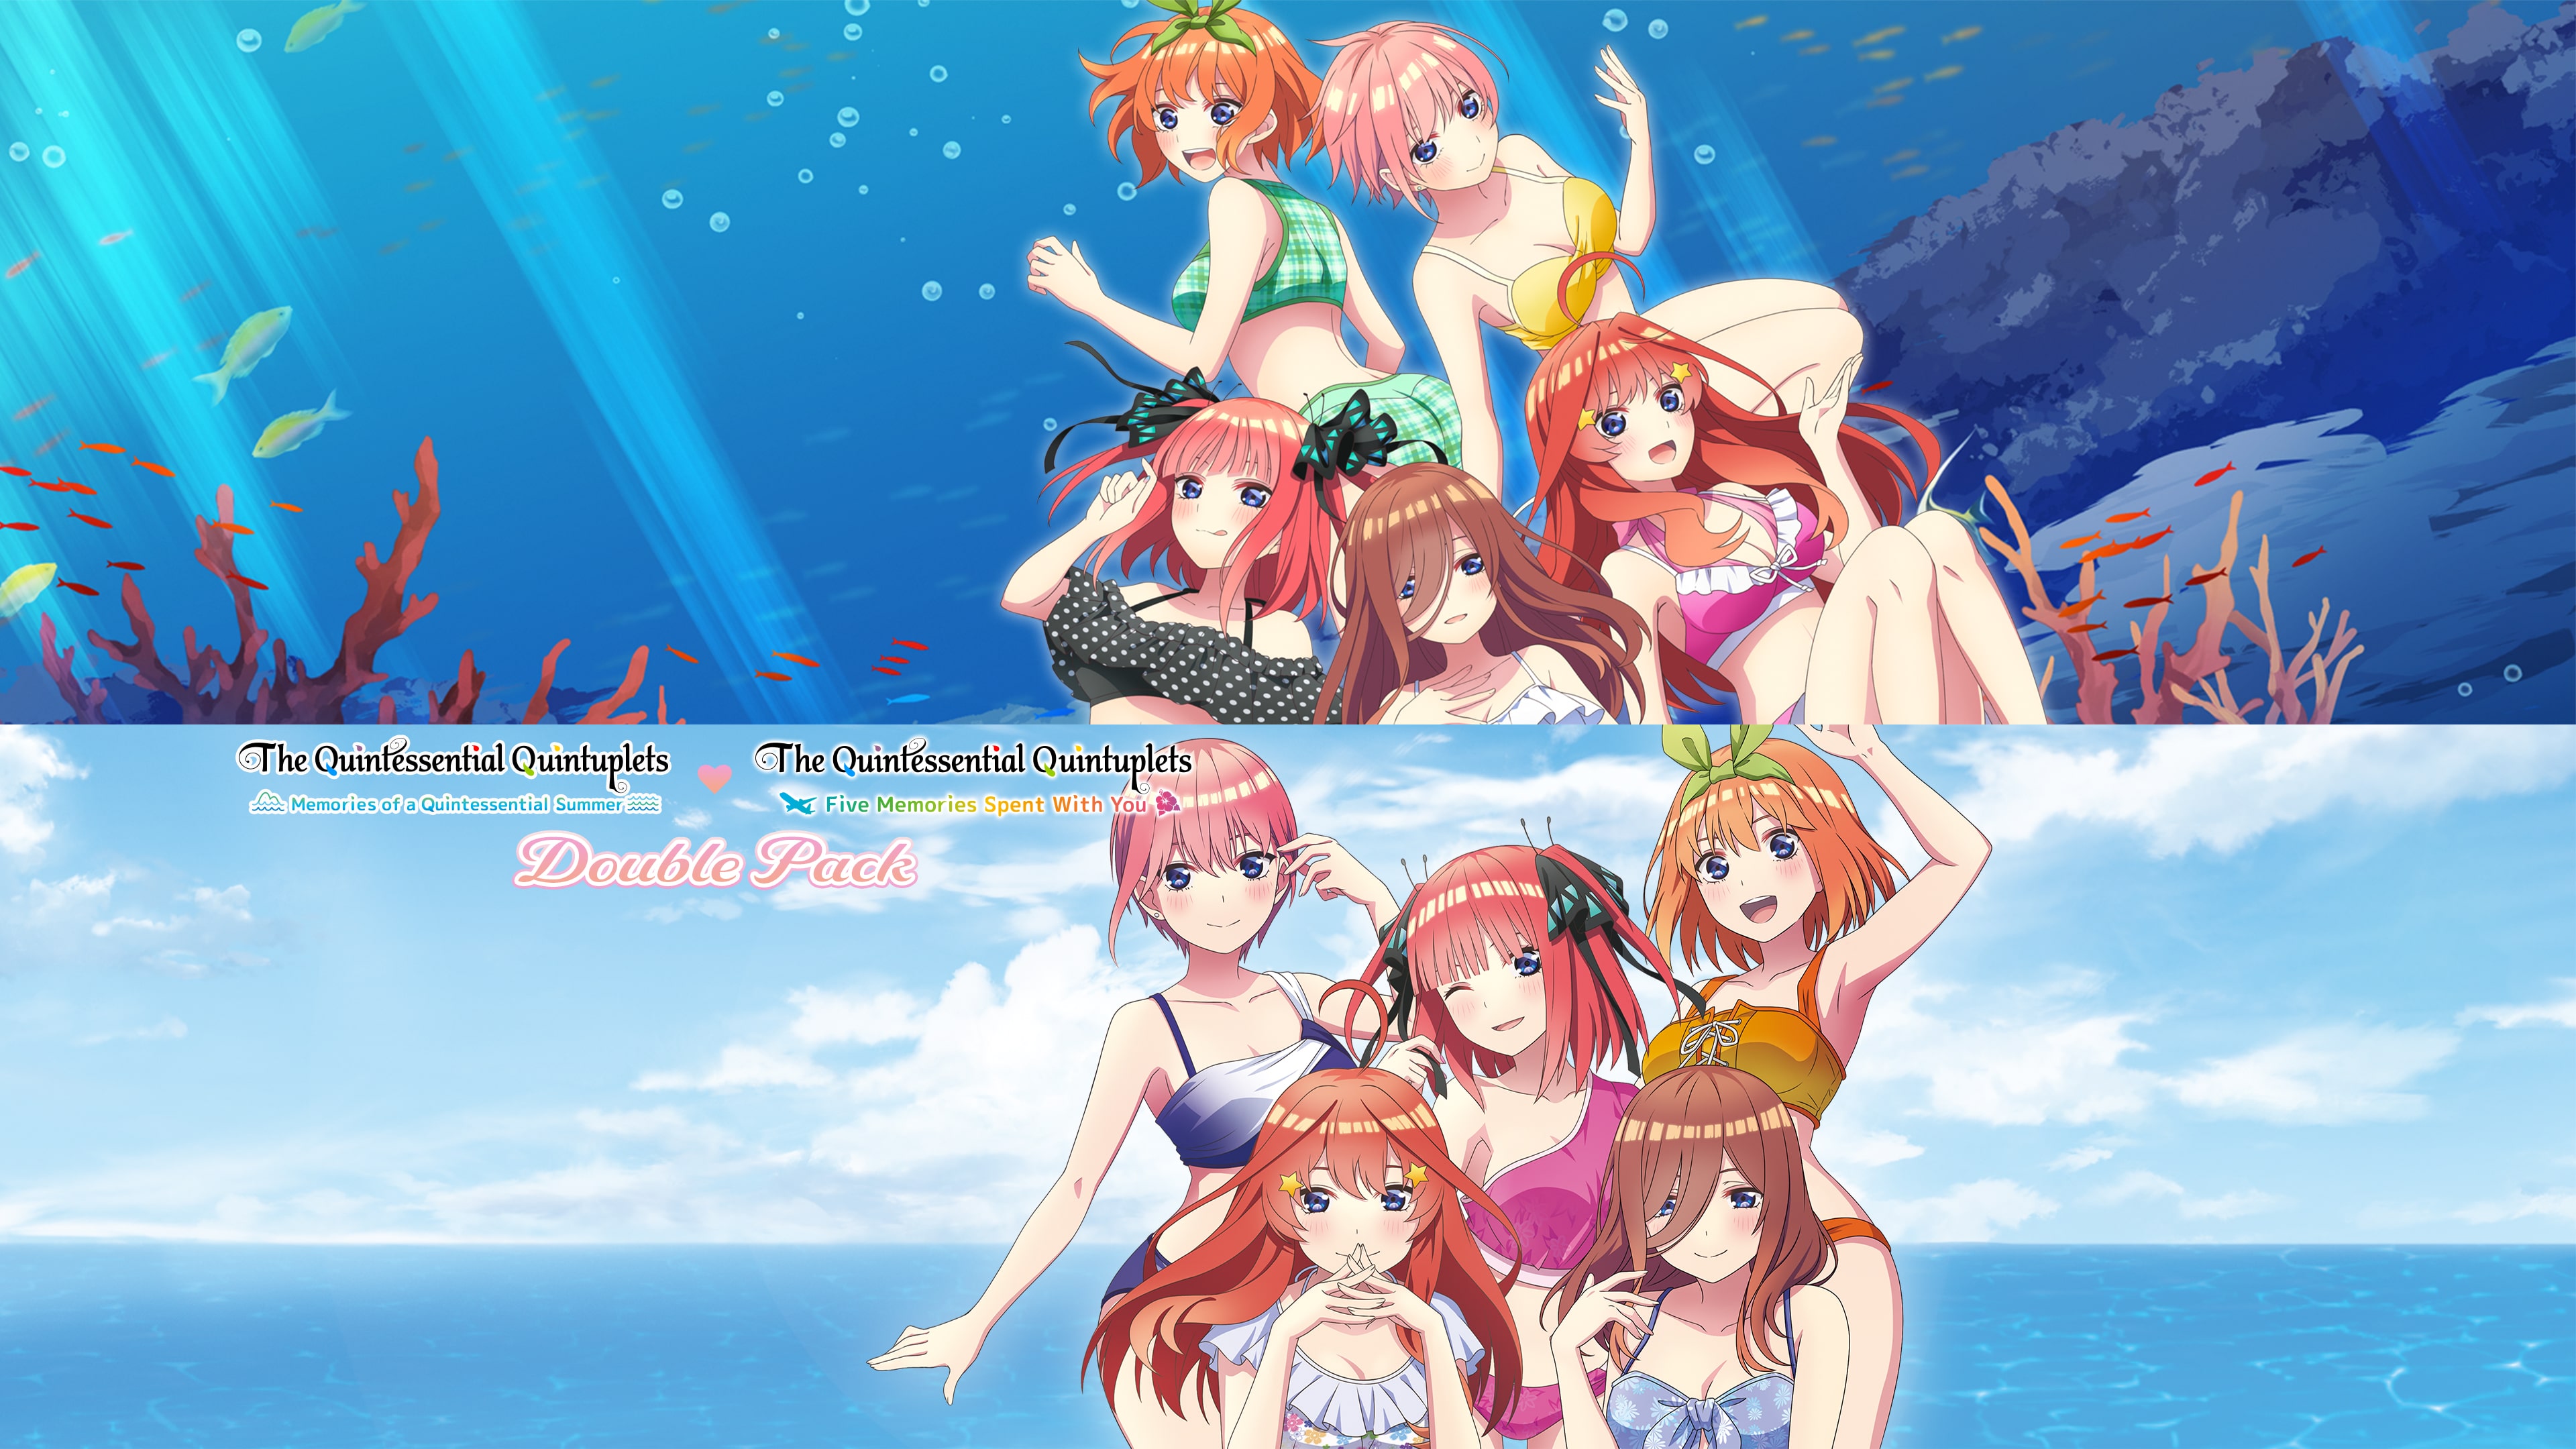 The Quintessential Quintuplets Double Pack (English, Japanese, Traditional Chinese)